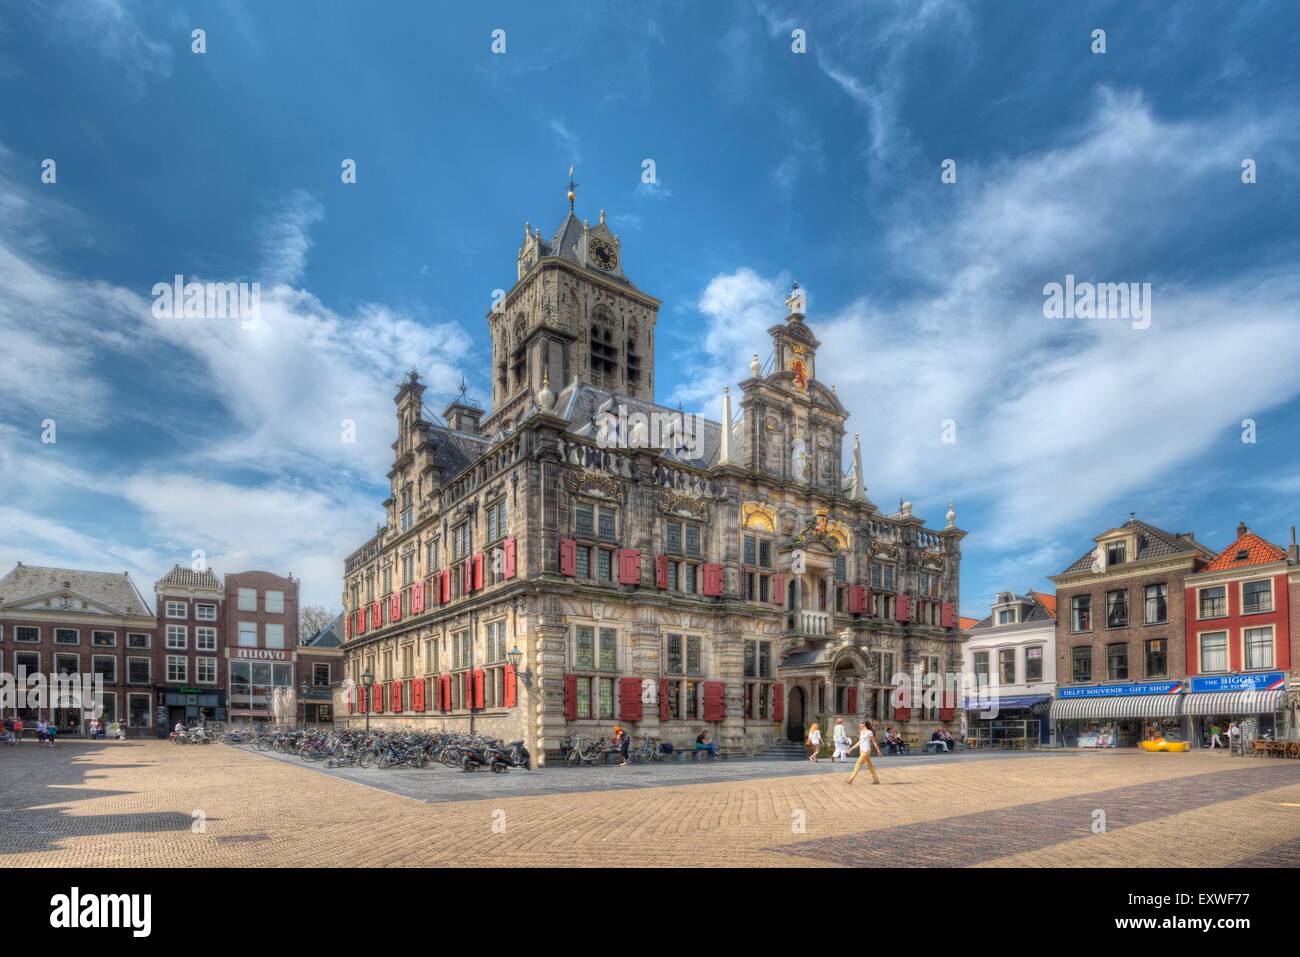 Market square with town hall in Delft, Netherlands Stock Photo